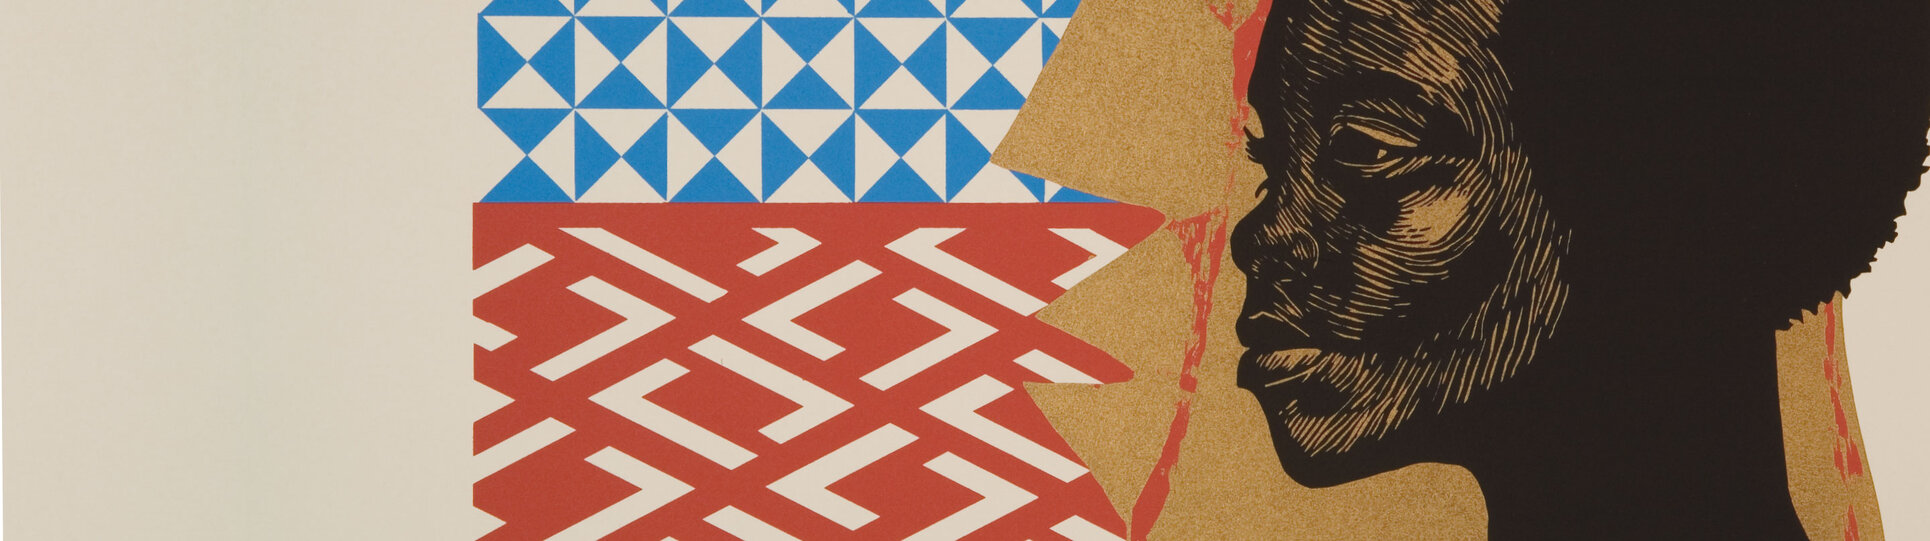 Detail of a print depicting a woman’s face and decorative abstract patterns